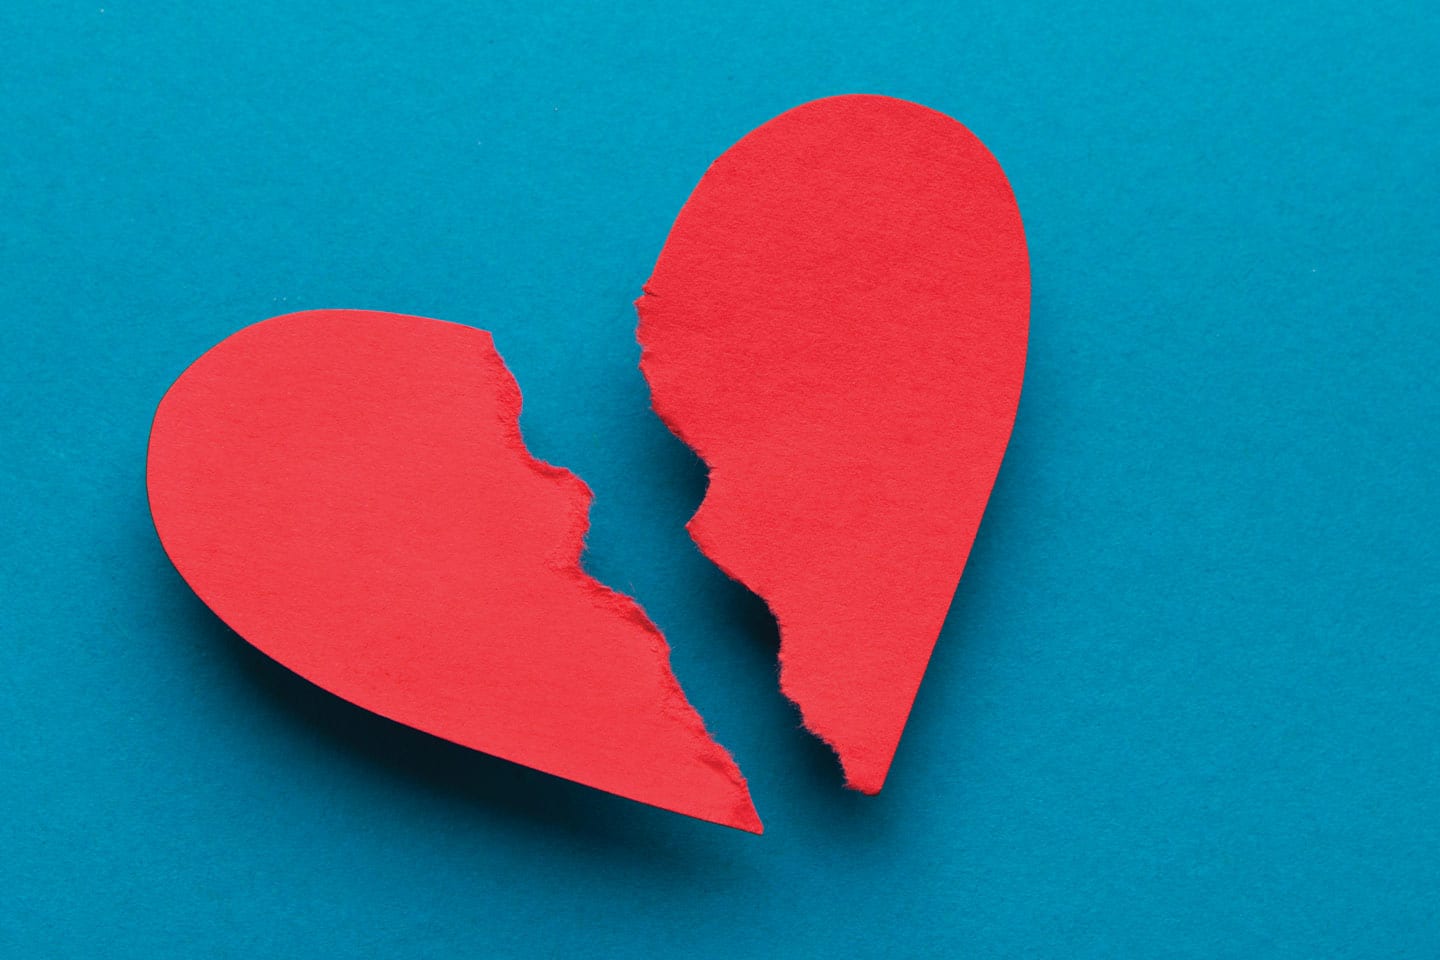 Torn red paper heart on a blue background representing a broken heart